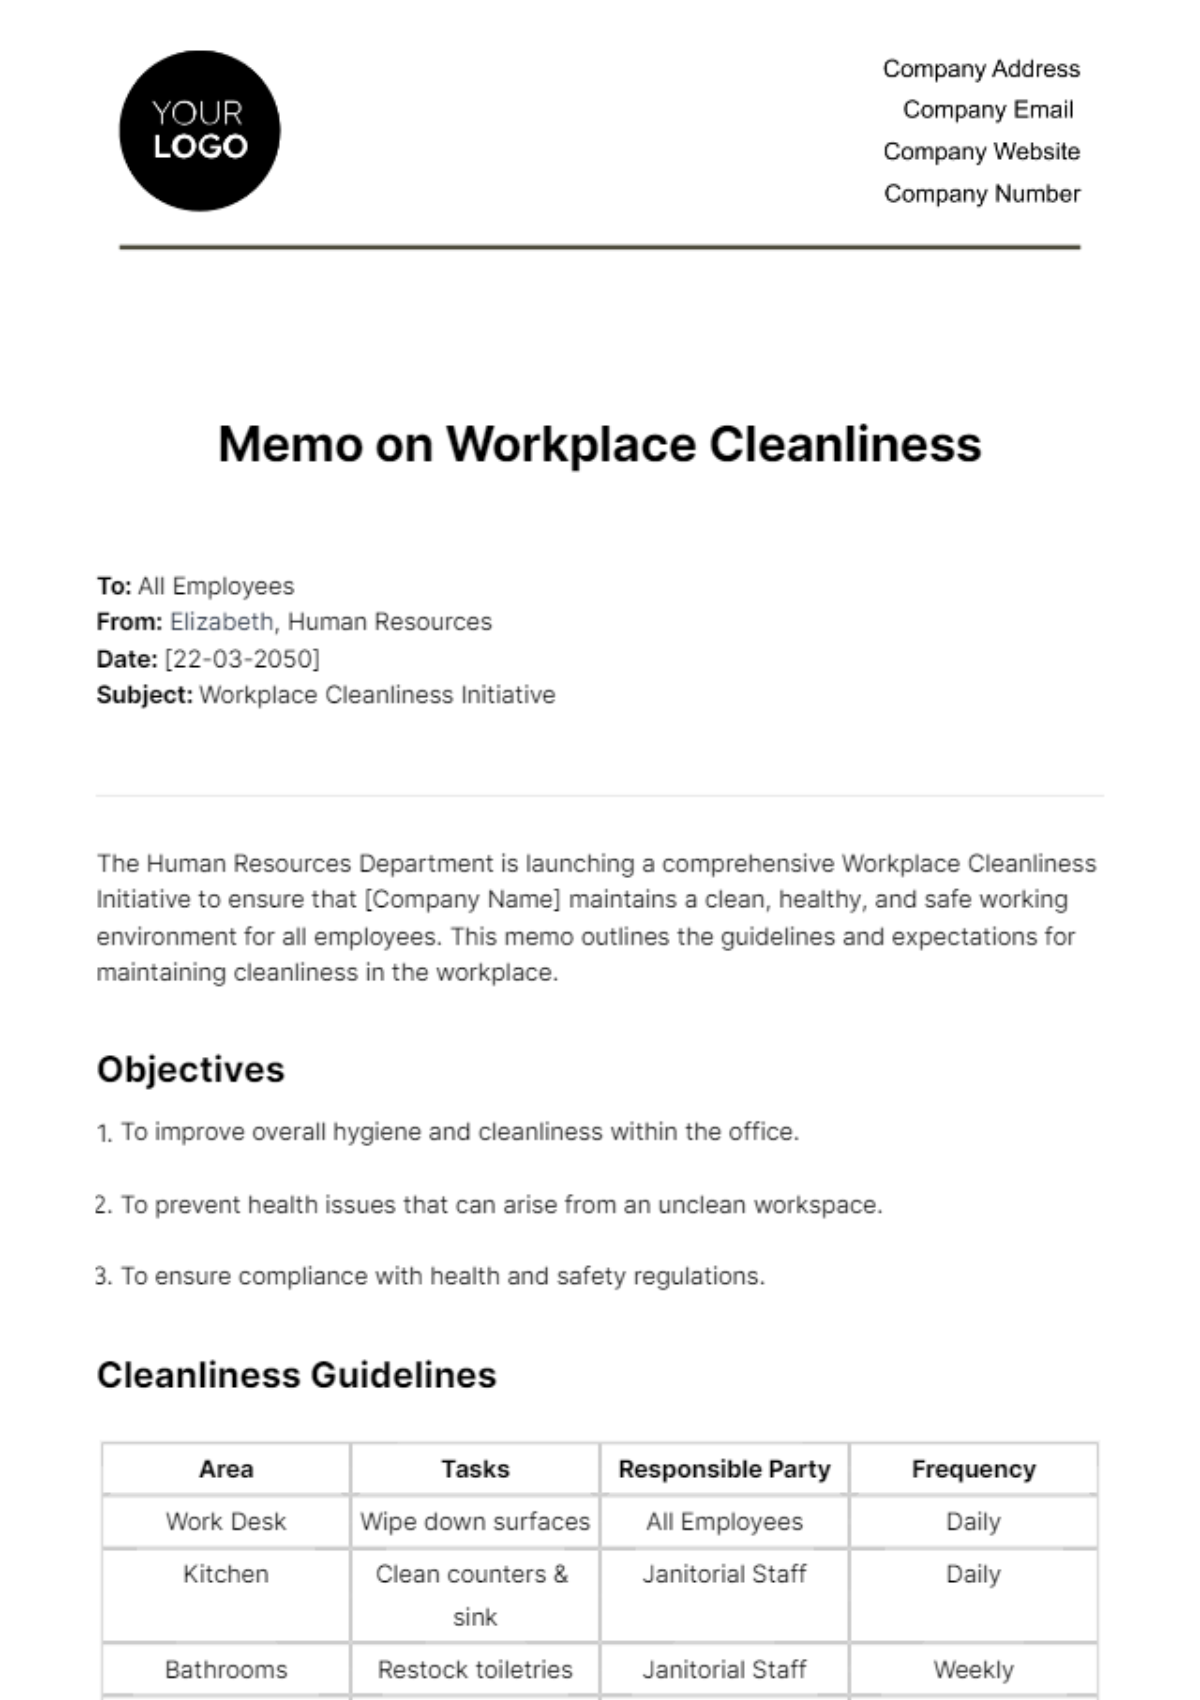 Memo on Workplace Cleanliness HR Template